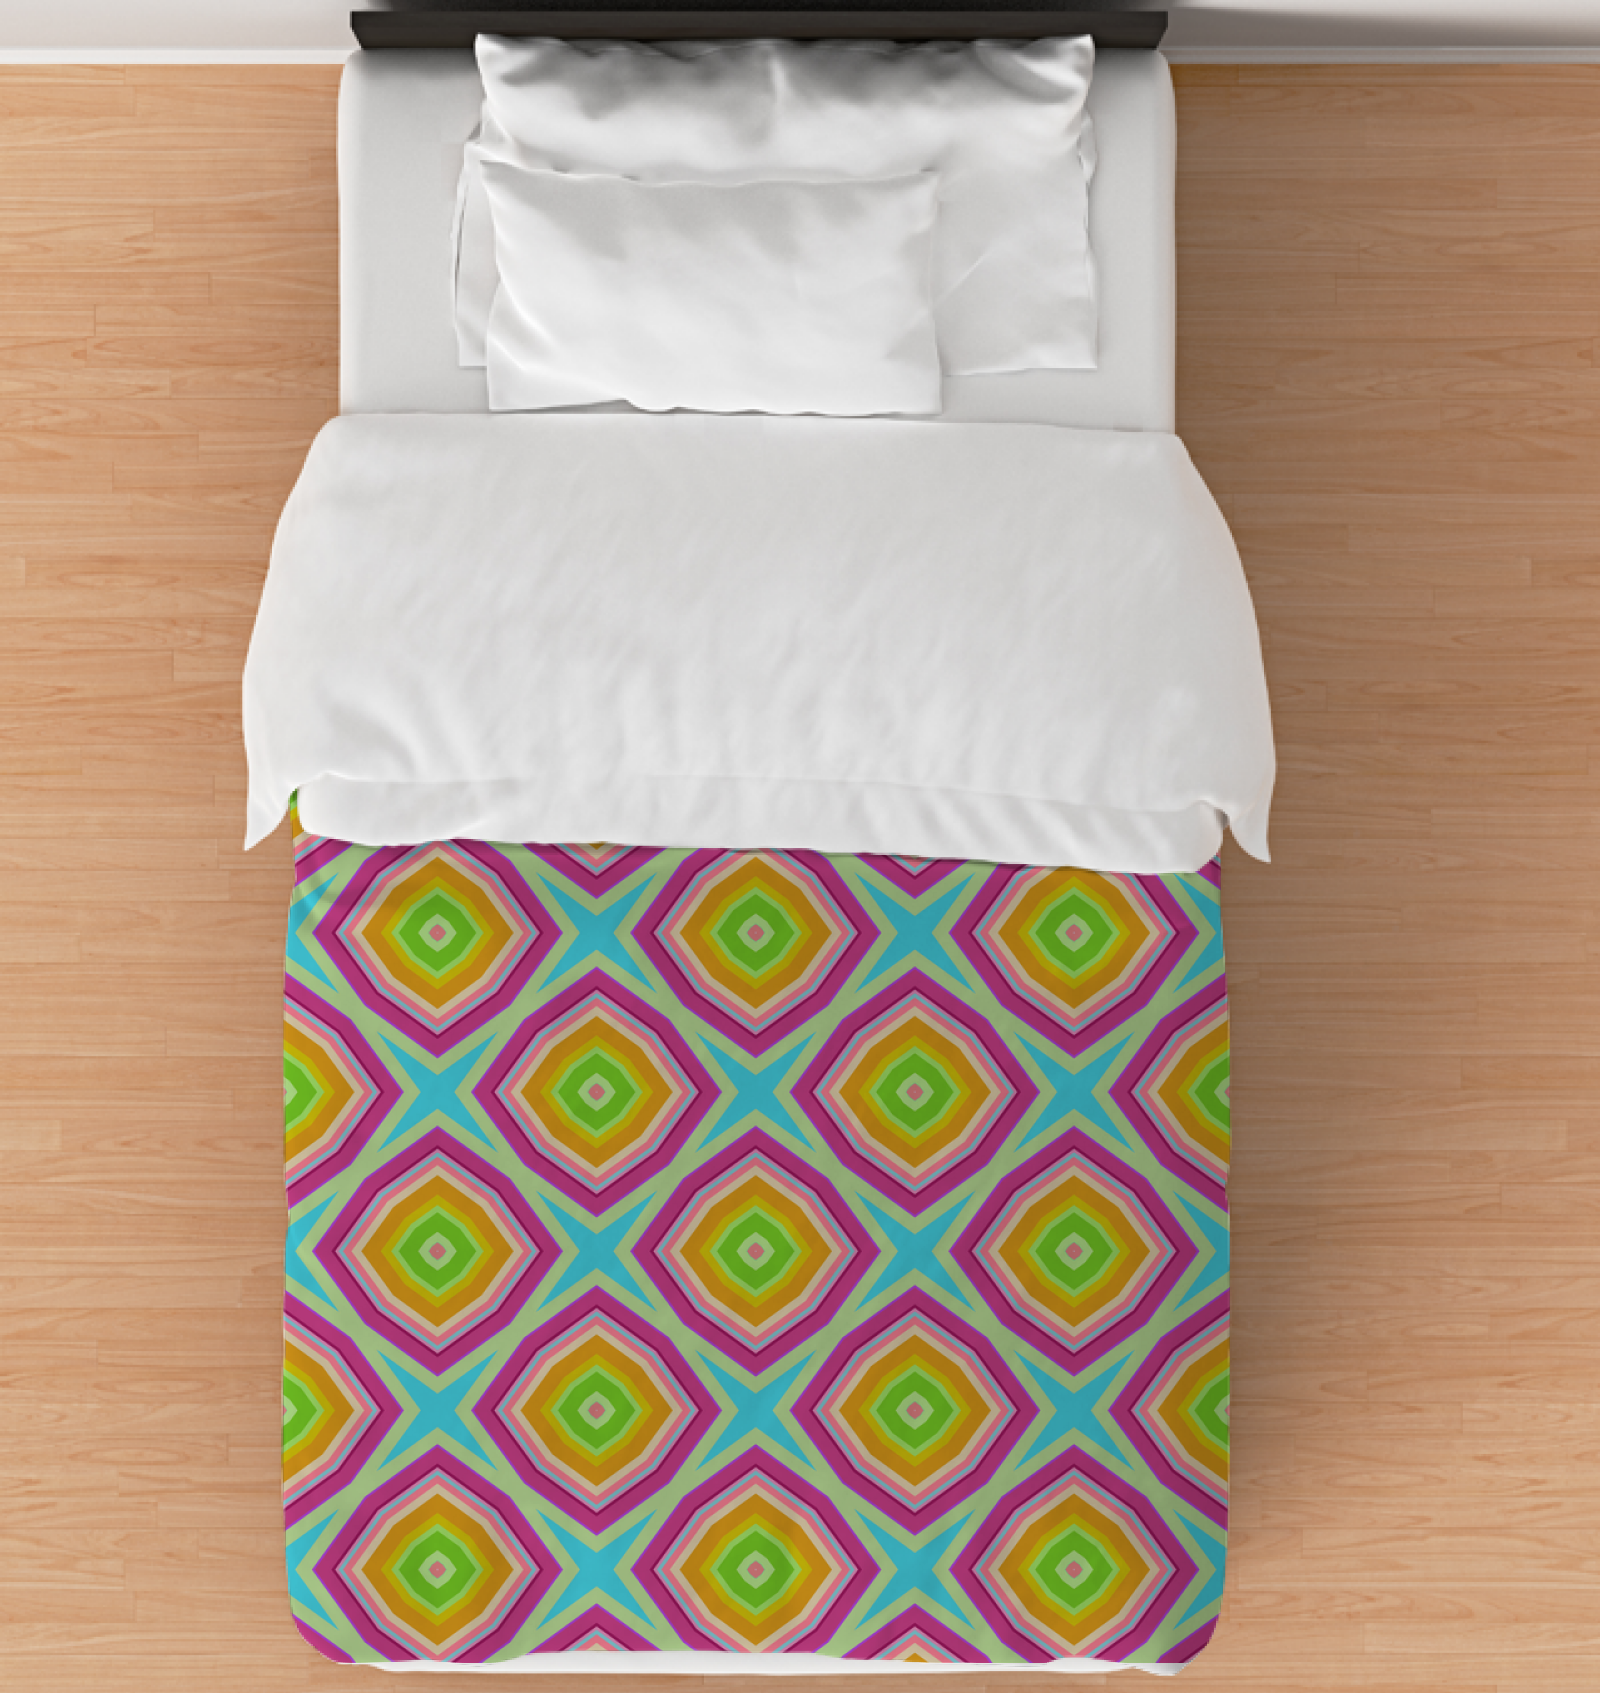 Ethnic Elegance Duvet Cover featuring intricate patterns.